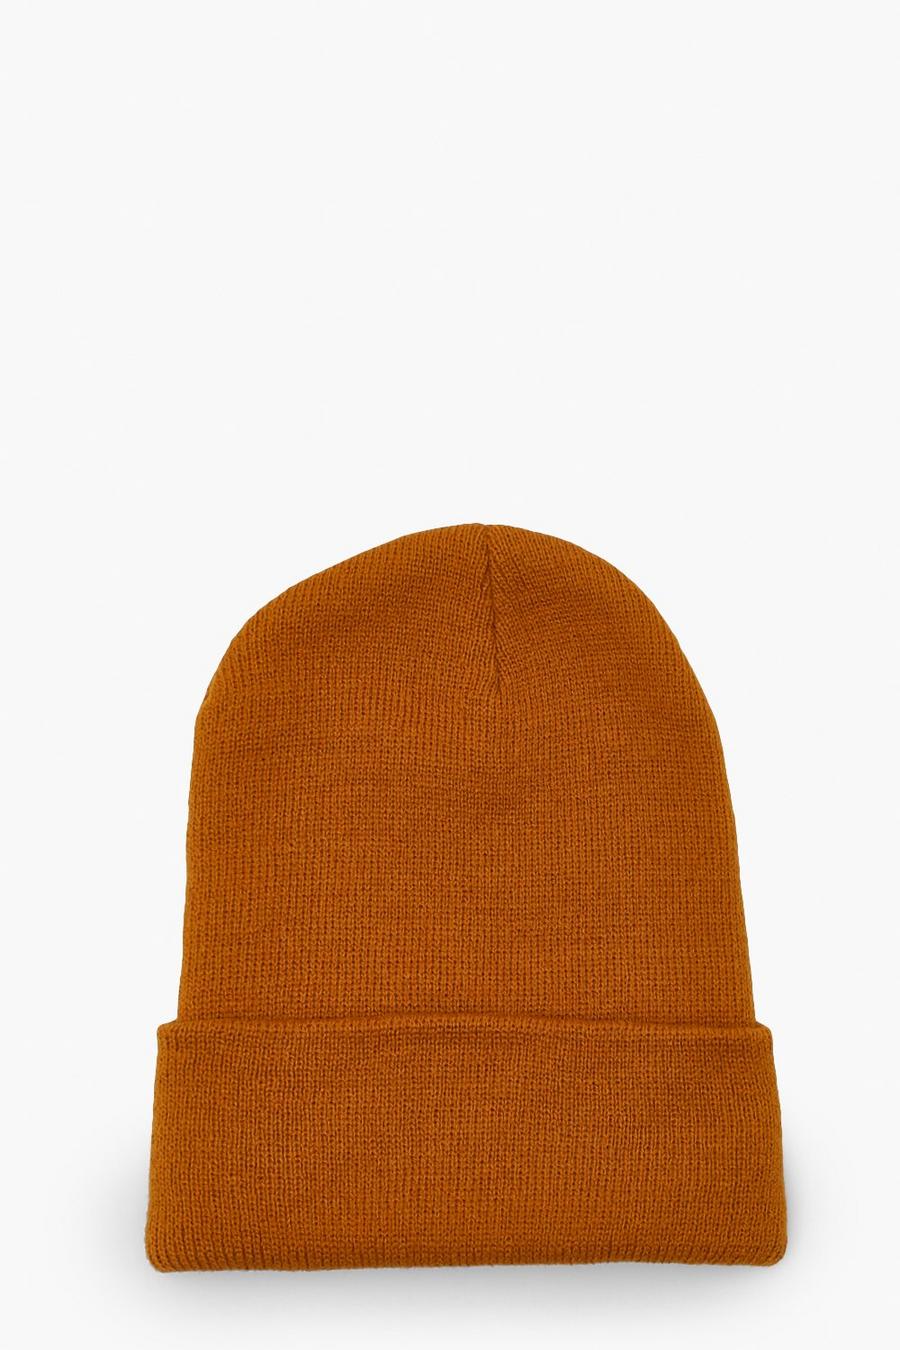 Tan Beanie Hat image number 1